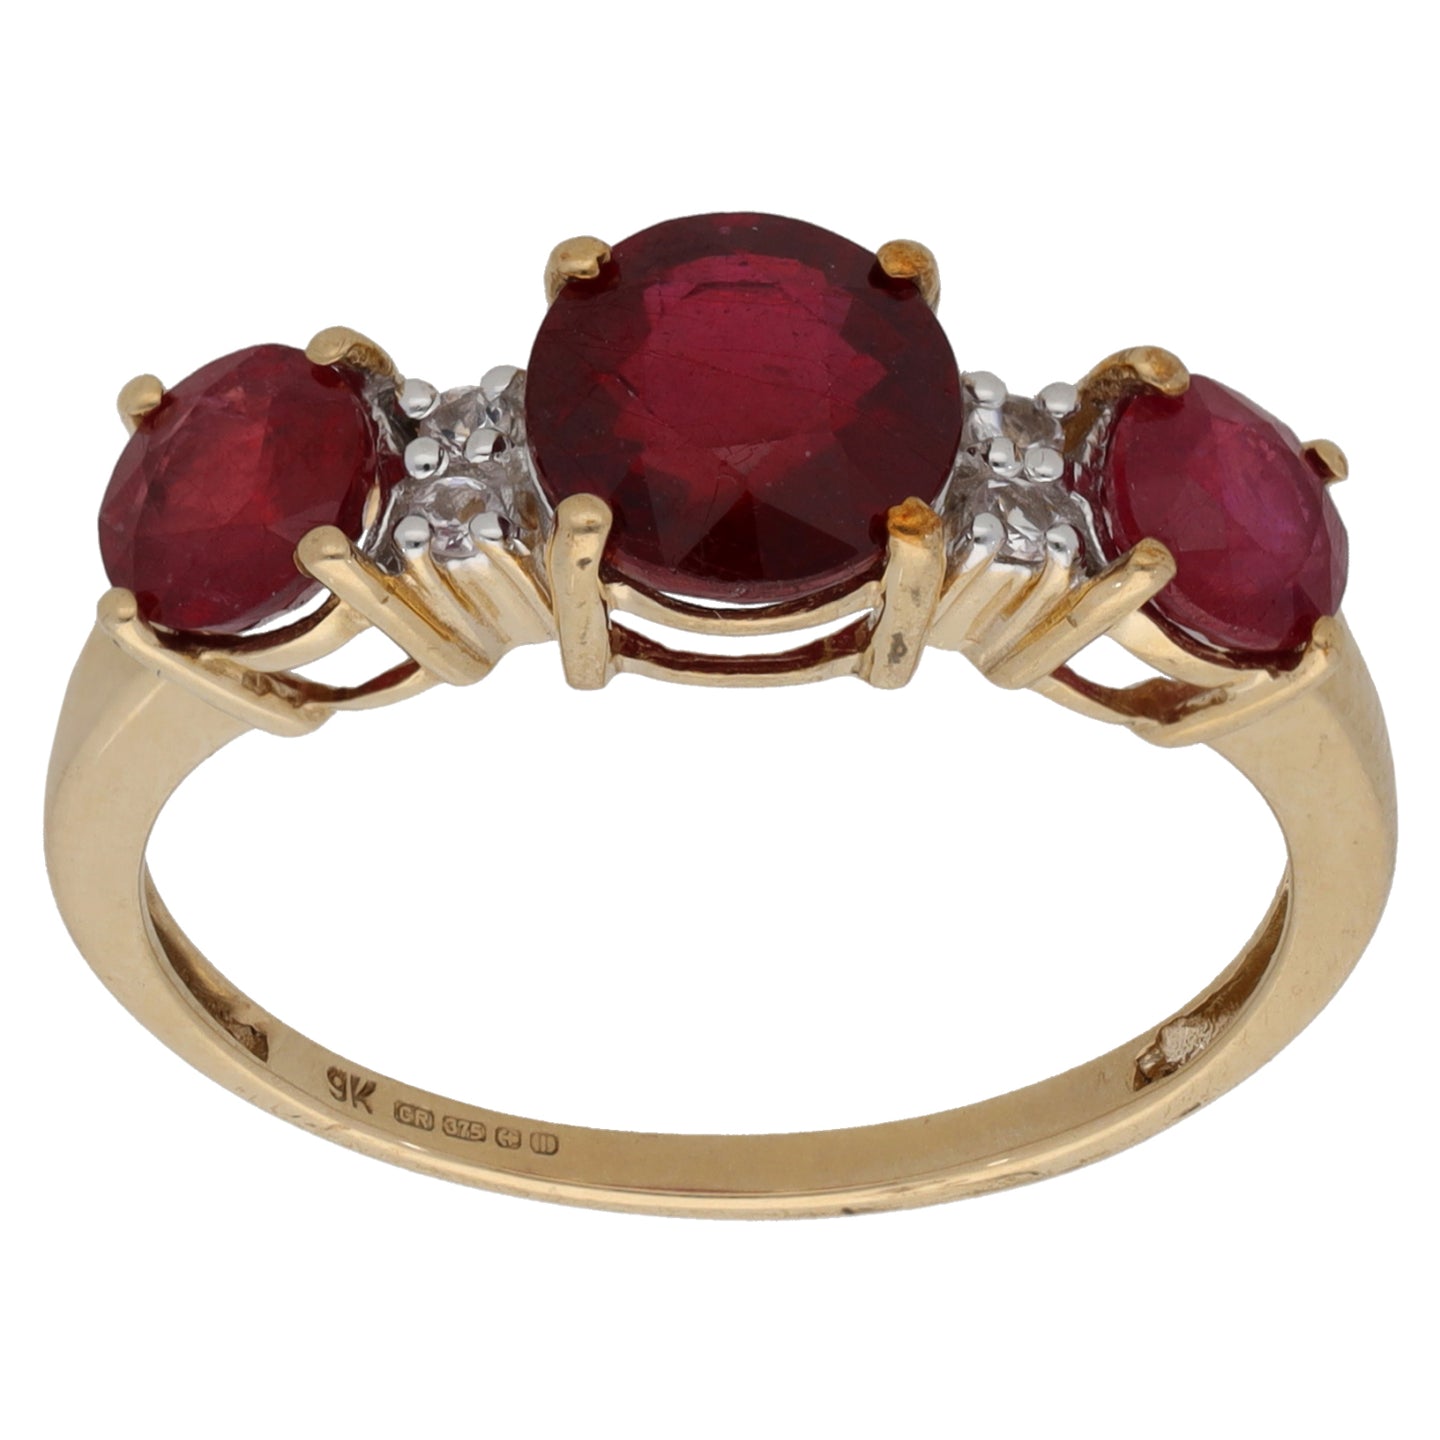 9ct Gold Glass Filled Ruby & Topaz Dress/Cocktail Ring Size R 1/2